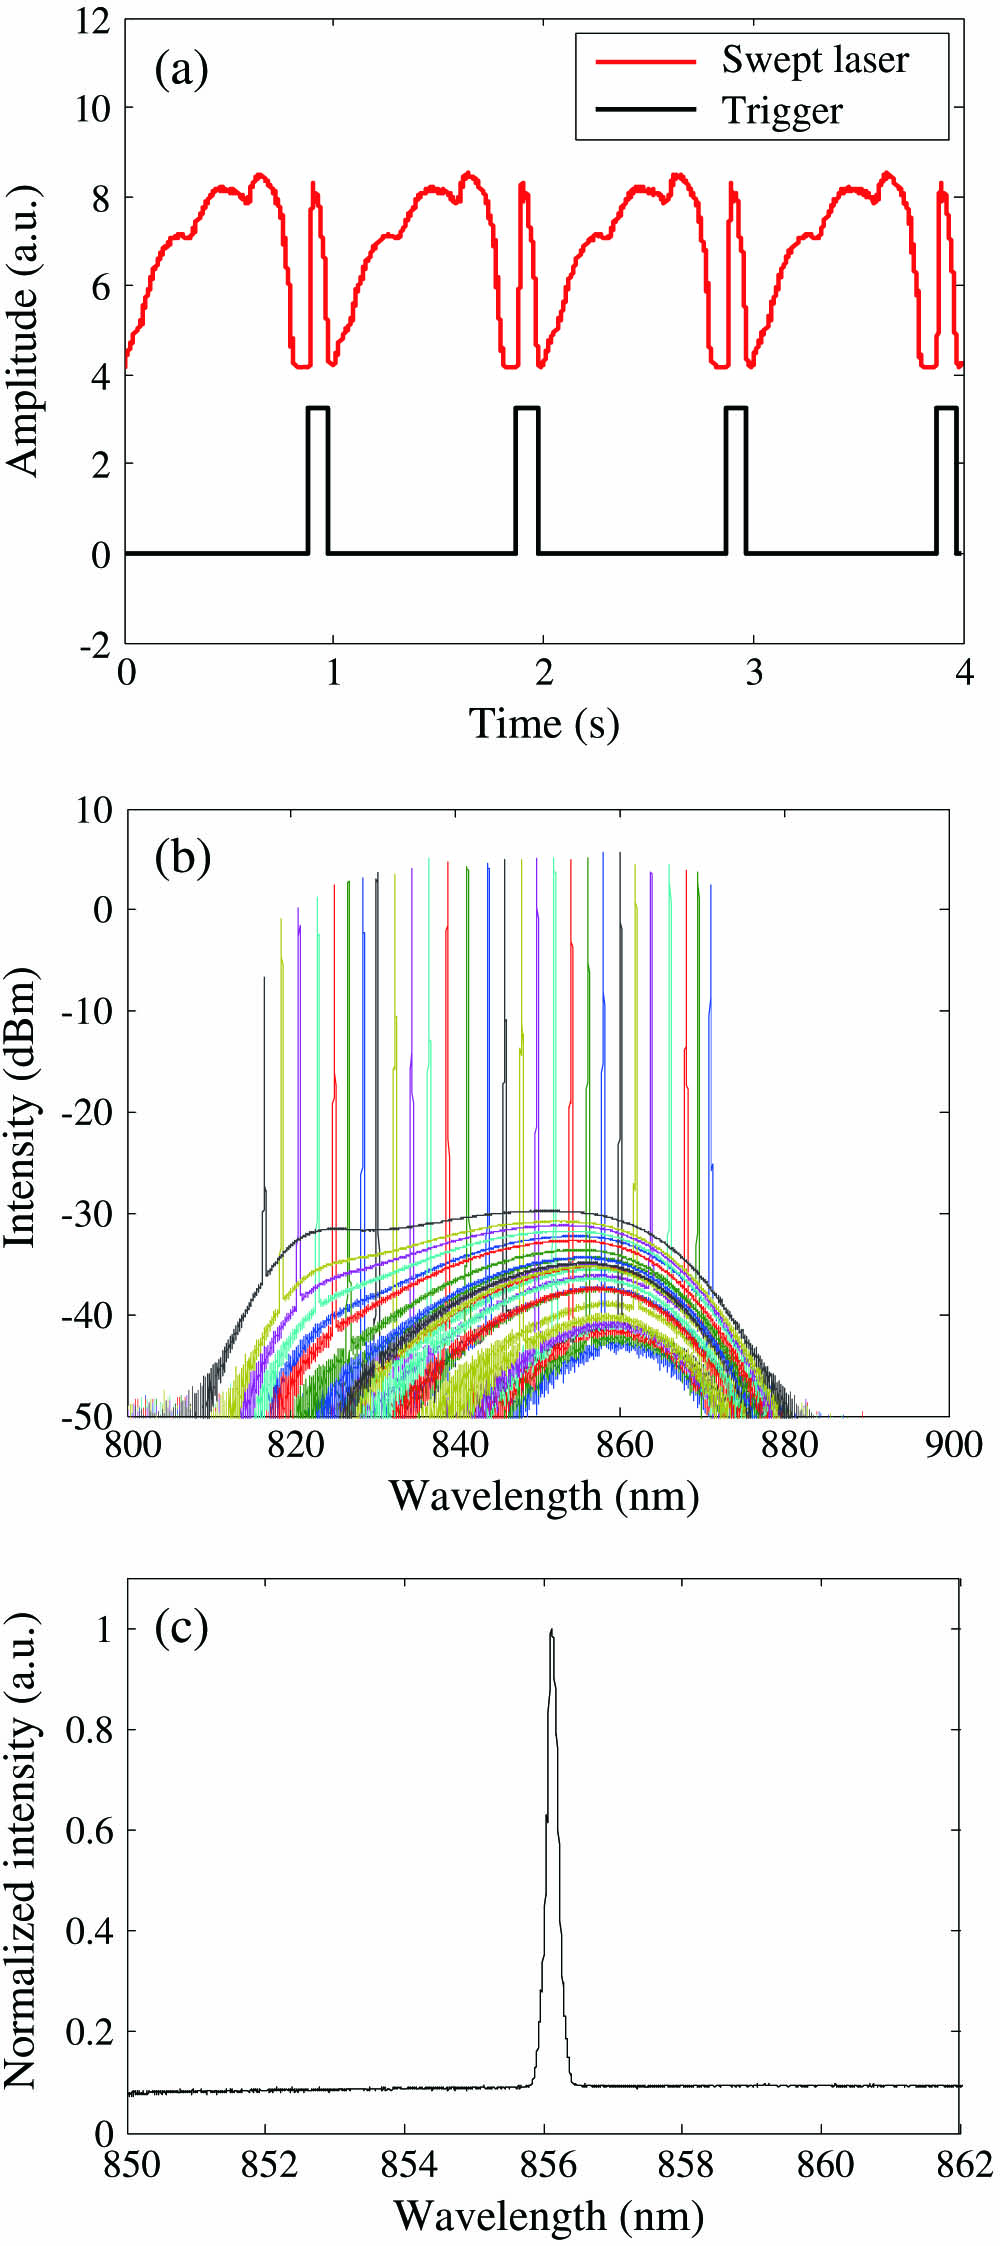 (a) Timing diagram of the wavelength-swept laser (red) and 3.3 V trigger signal (black). (b) Amplified output of the wavelength-swept laser, each at 100 mV voltage increment to the galvo scanner. (c) Single linewidth plot at 856 nm center with a 0.05 nm (∼20 GHz) 3 dB linewidth.